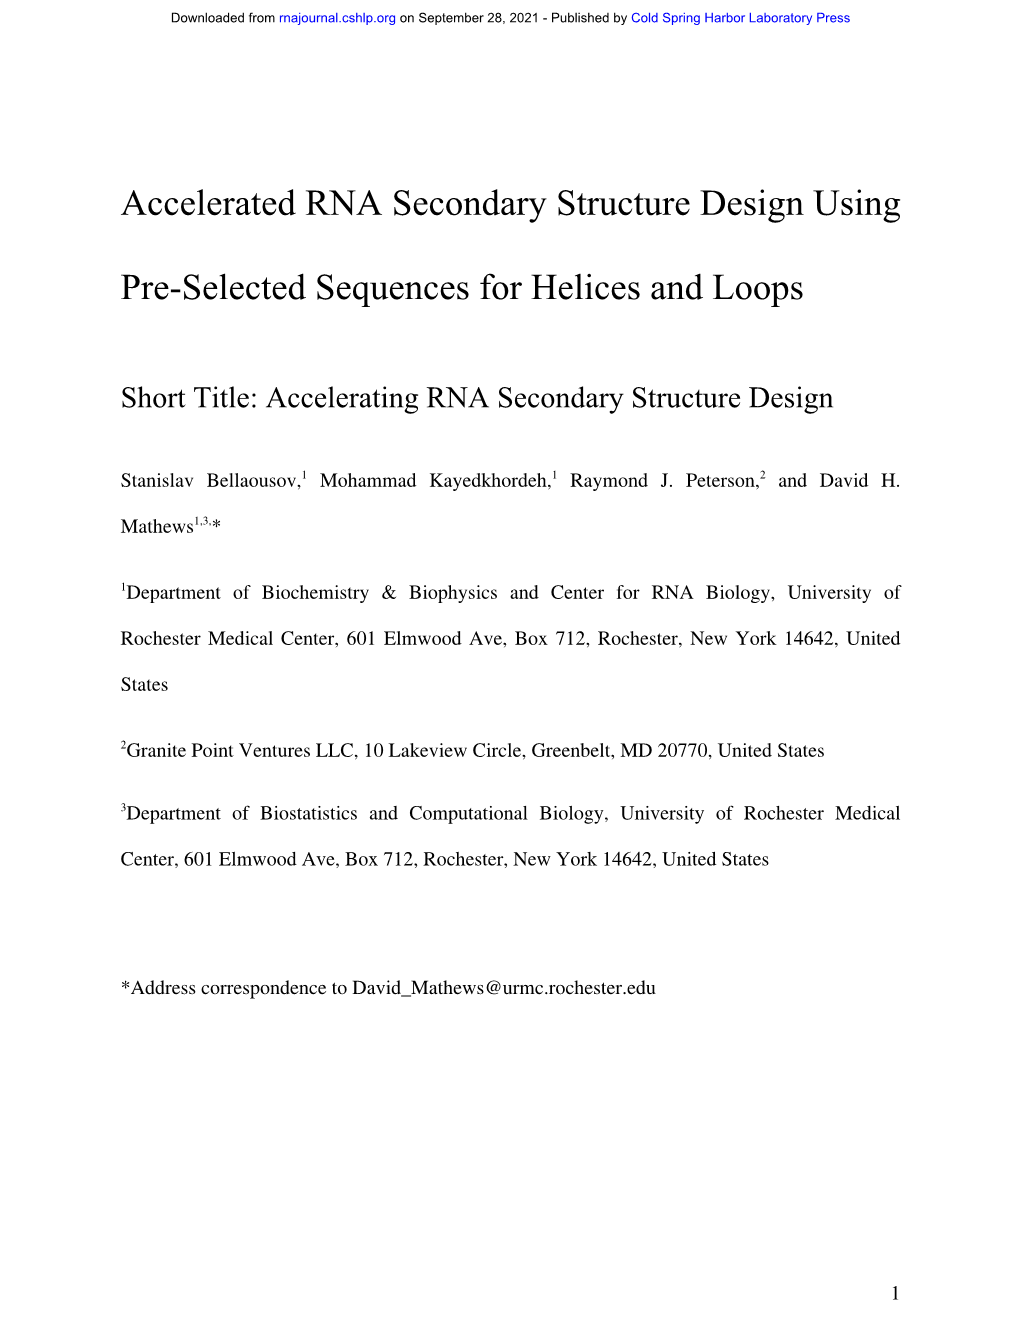 Accelerated RNA Secondary Structure Design Using Pre-Selected Sequences for Helices and Loops